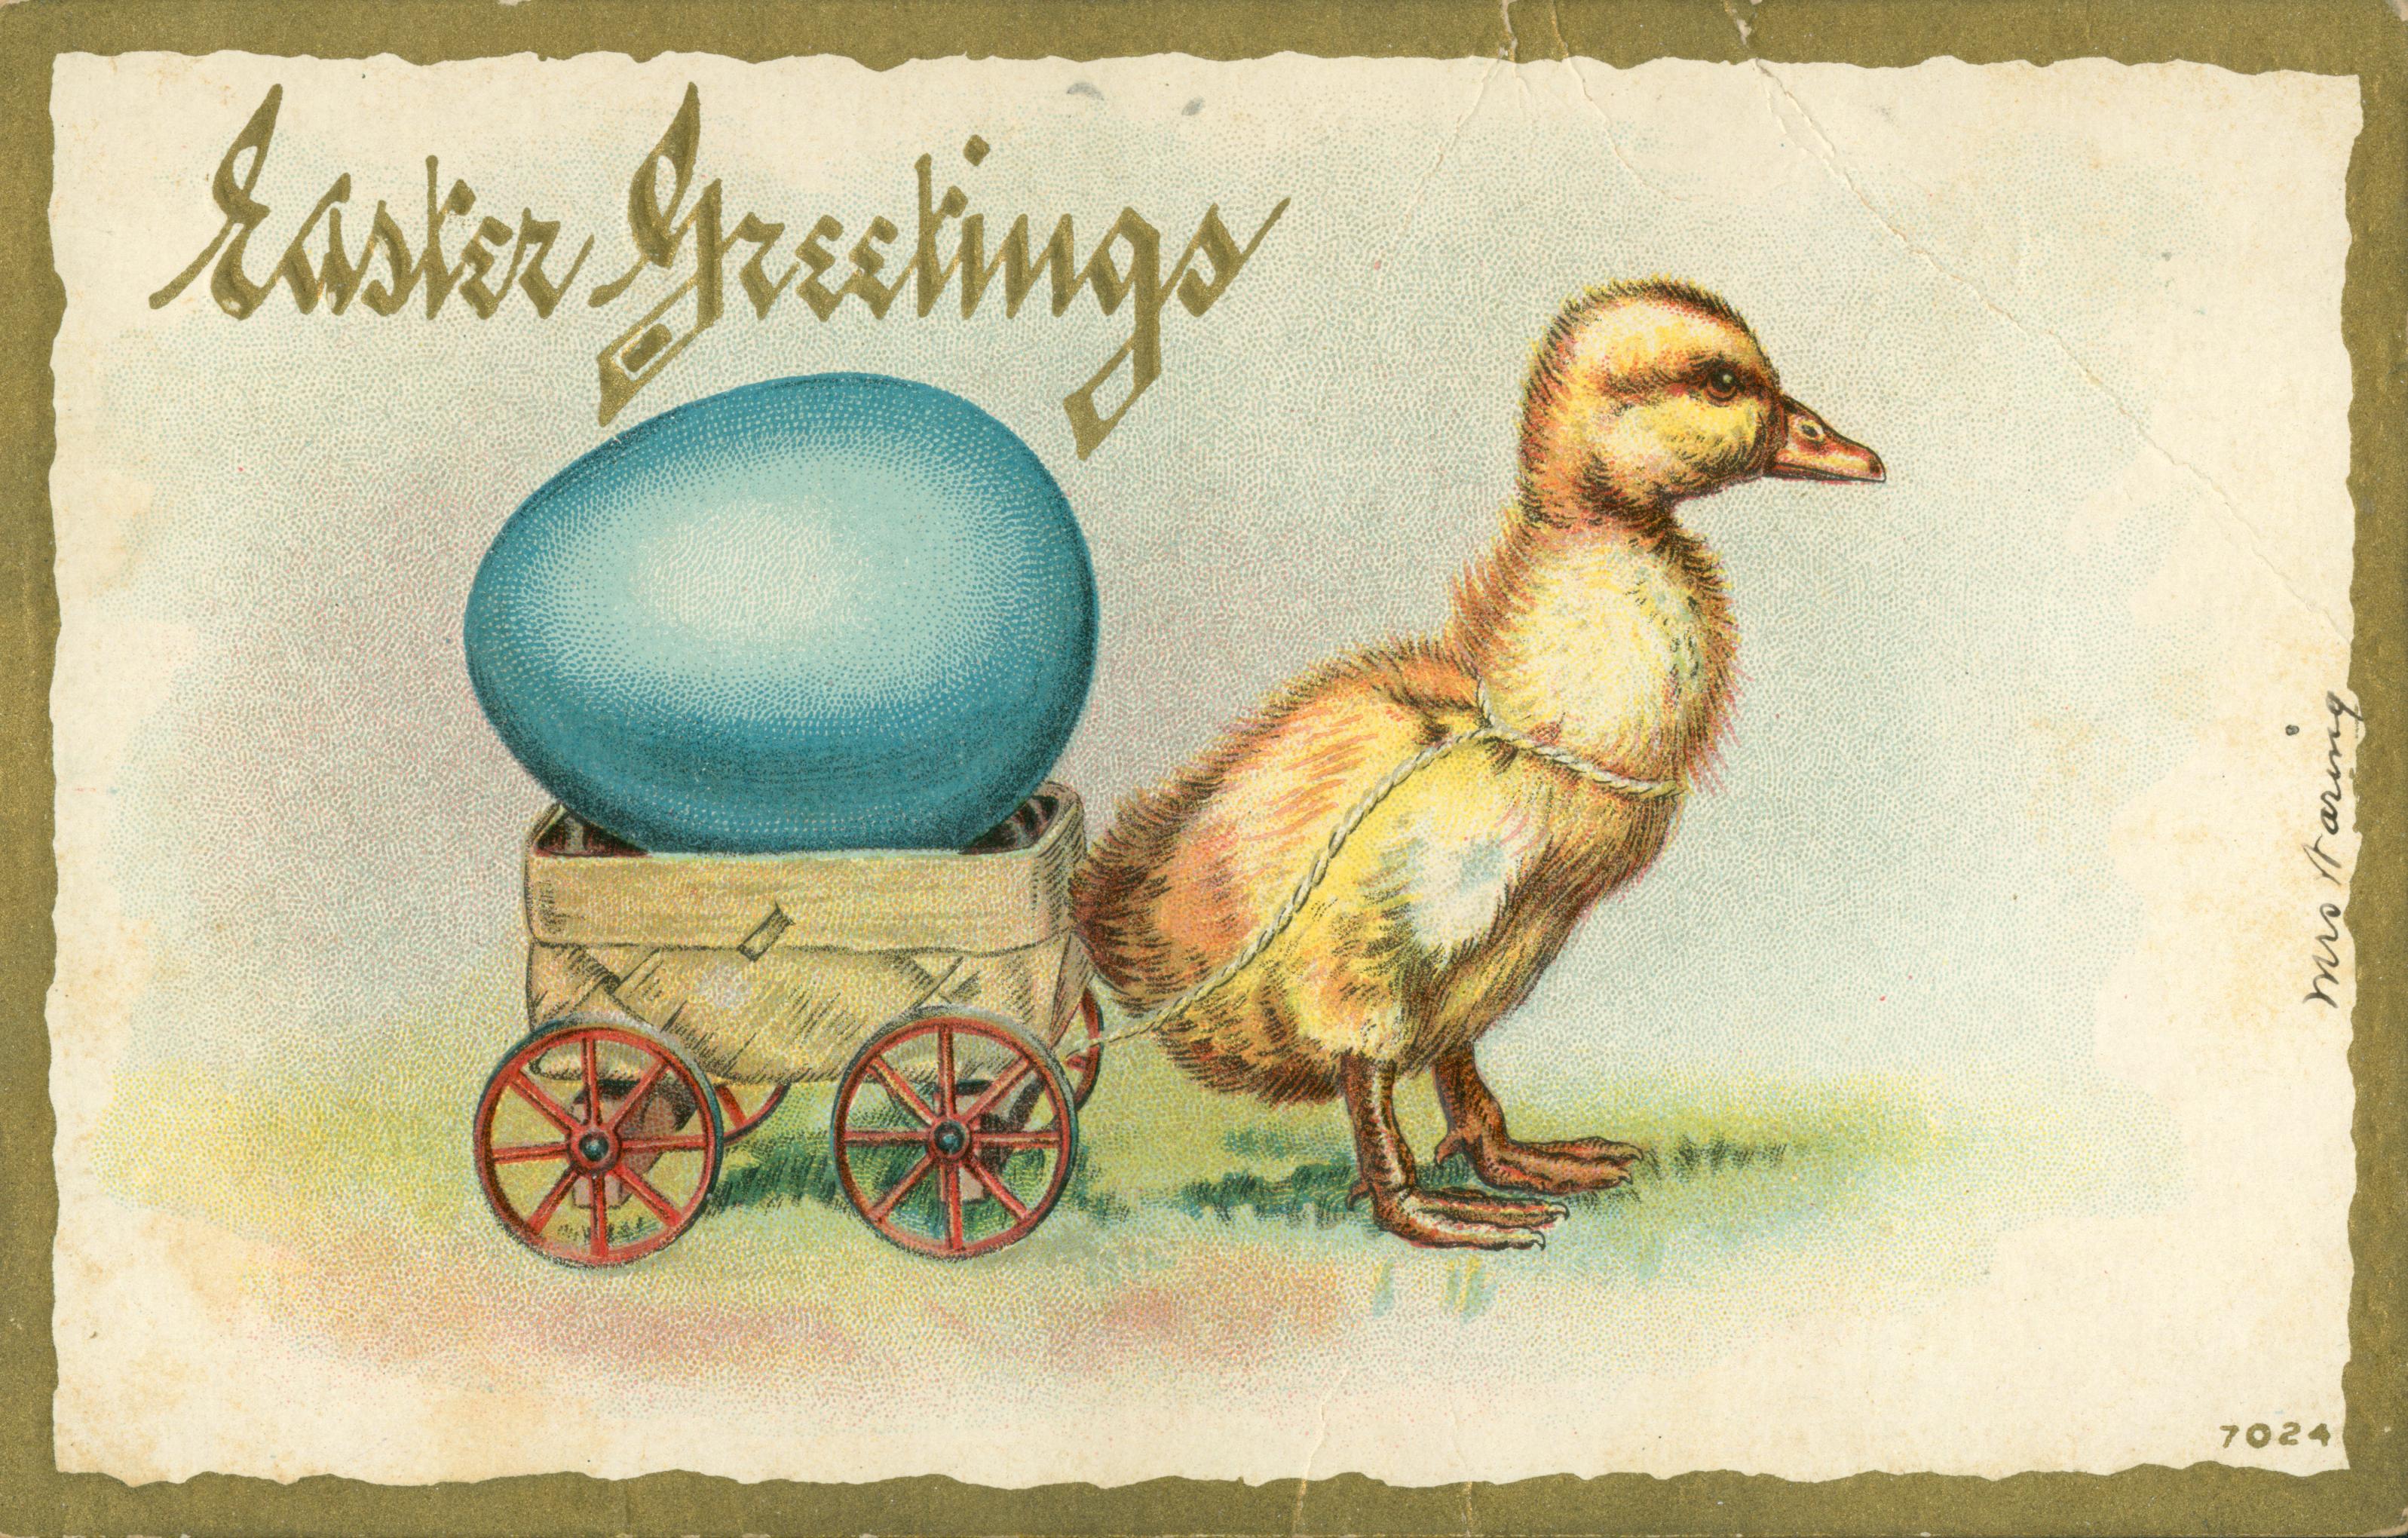 A chick pulling a wagon with a blue eggo on it.